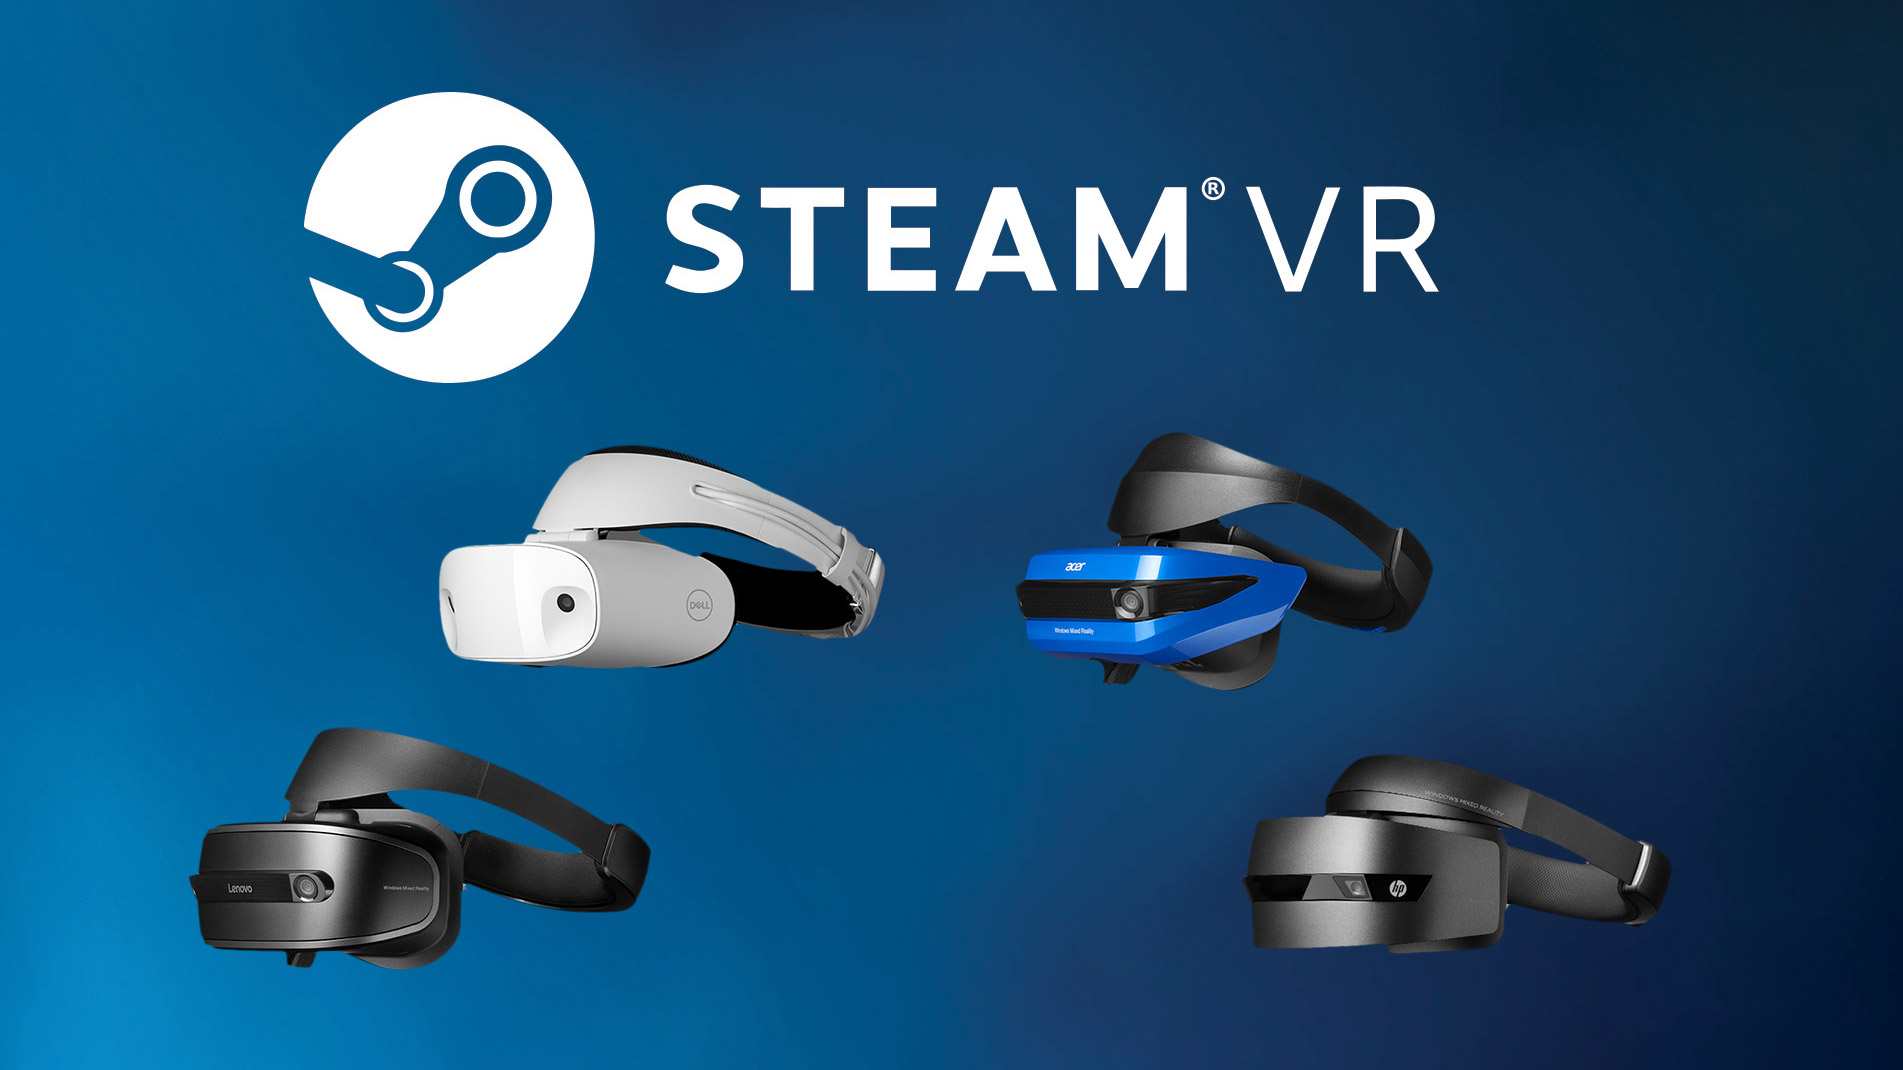 vr headset that works with steam